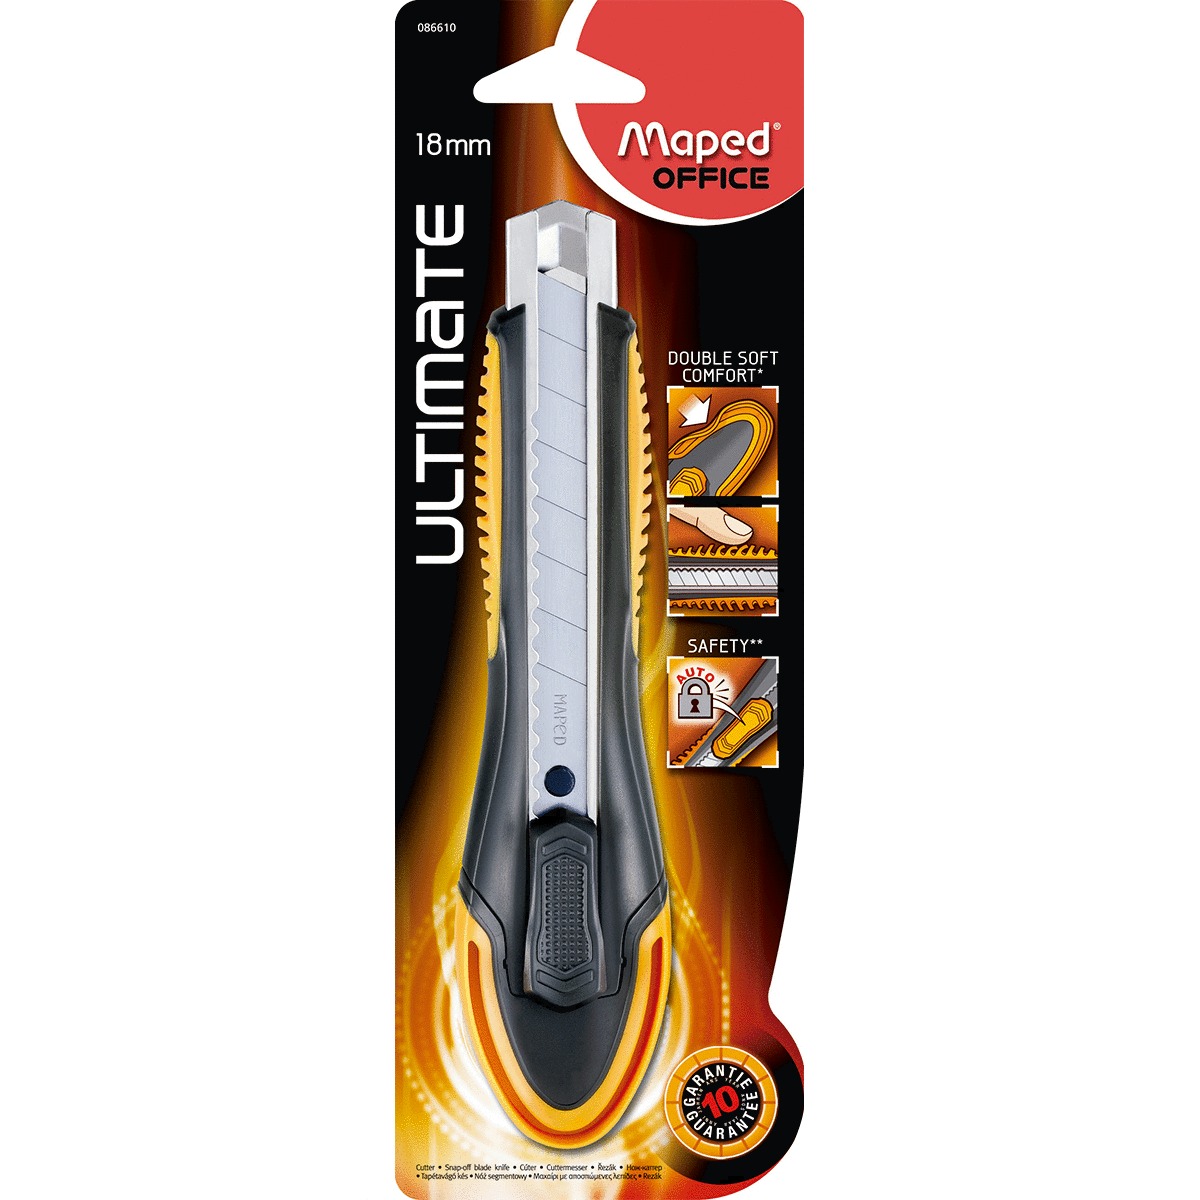 CUTTER MAPED OFFICE ULTIMATE (AMARILLO, 18 MM)